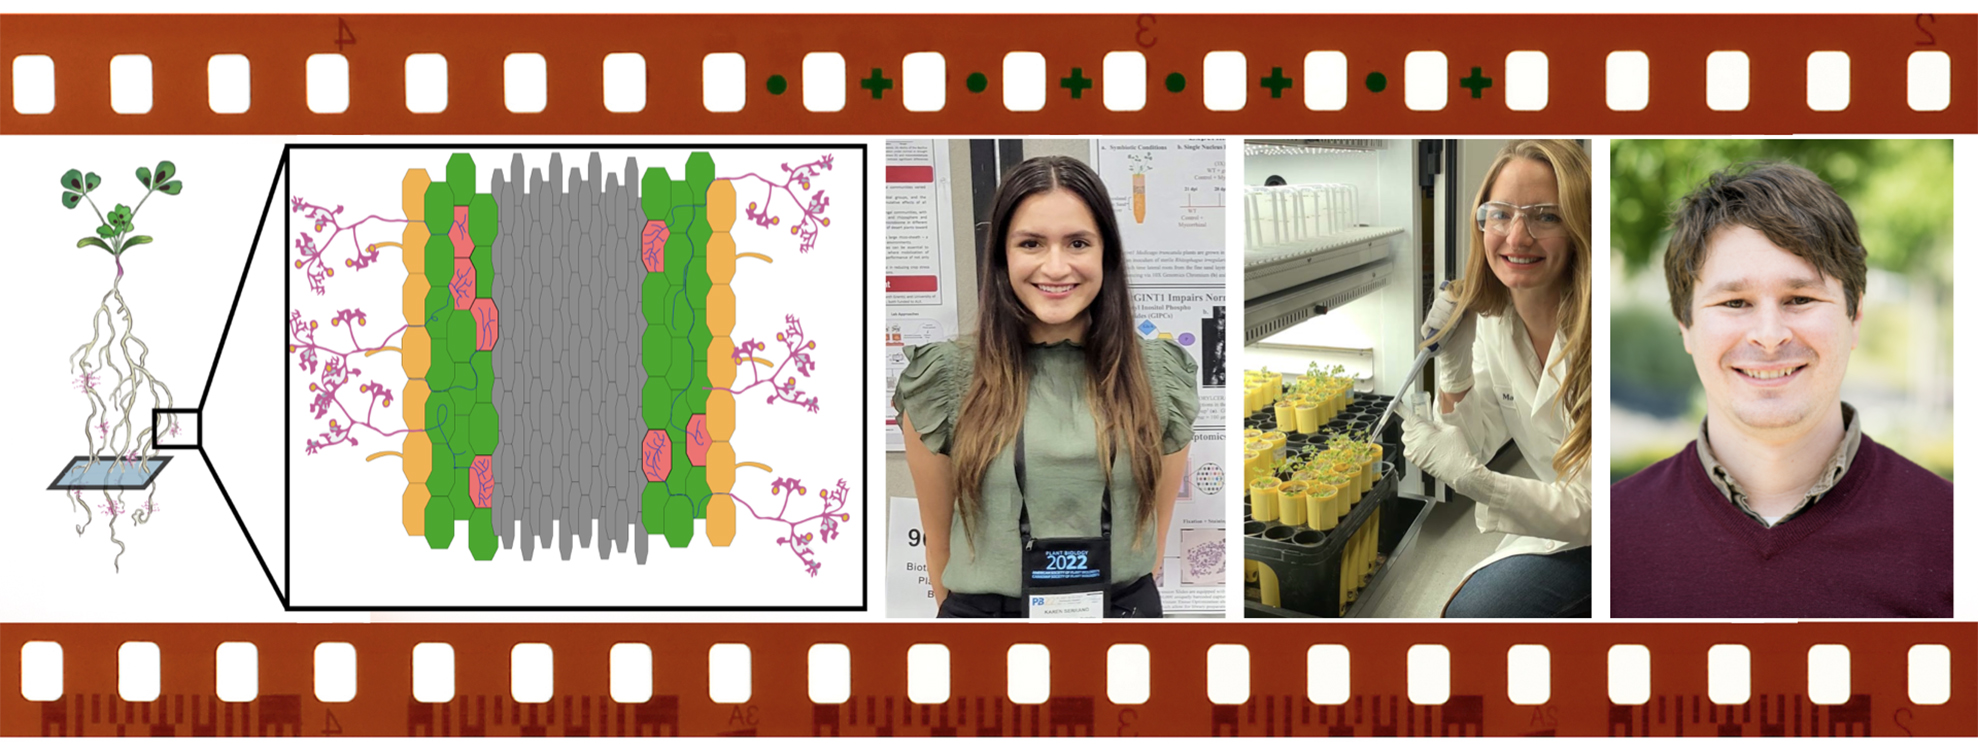 A filmstrip-style illustration shows the three researchers who worked on this study and their study subject: the model legume species Medicago truncatula and the mycorrhizal fungi Rhizophagus irregularis.